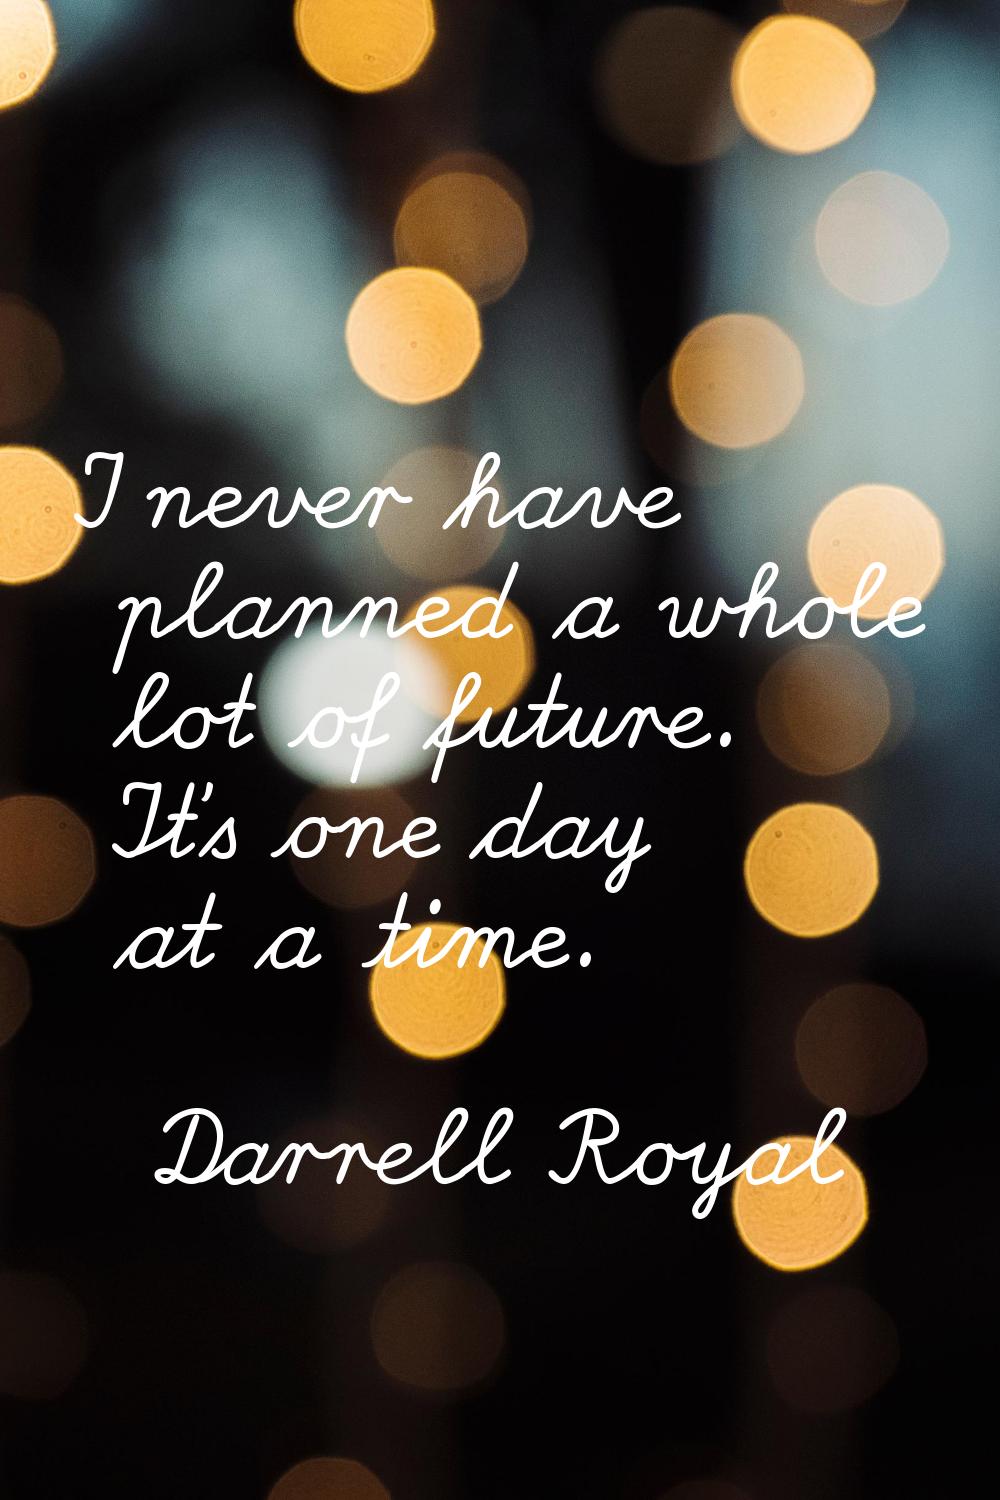 I never have planned a whole lot of future. It's one day at a time.